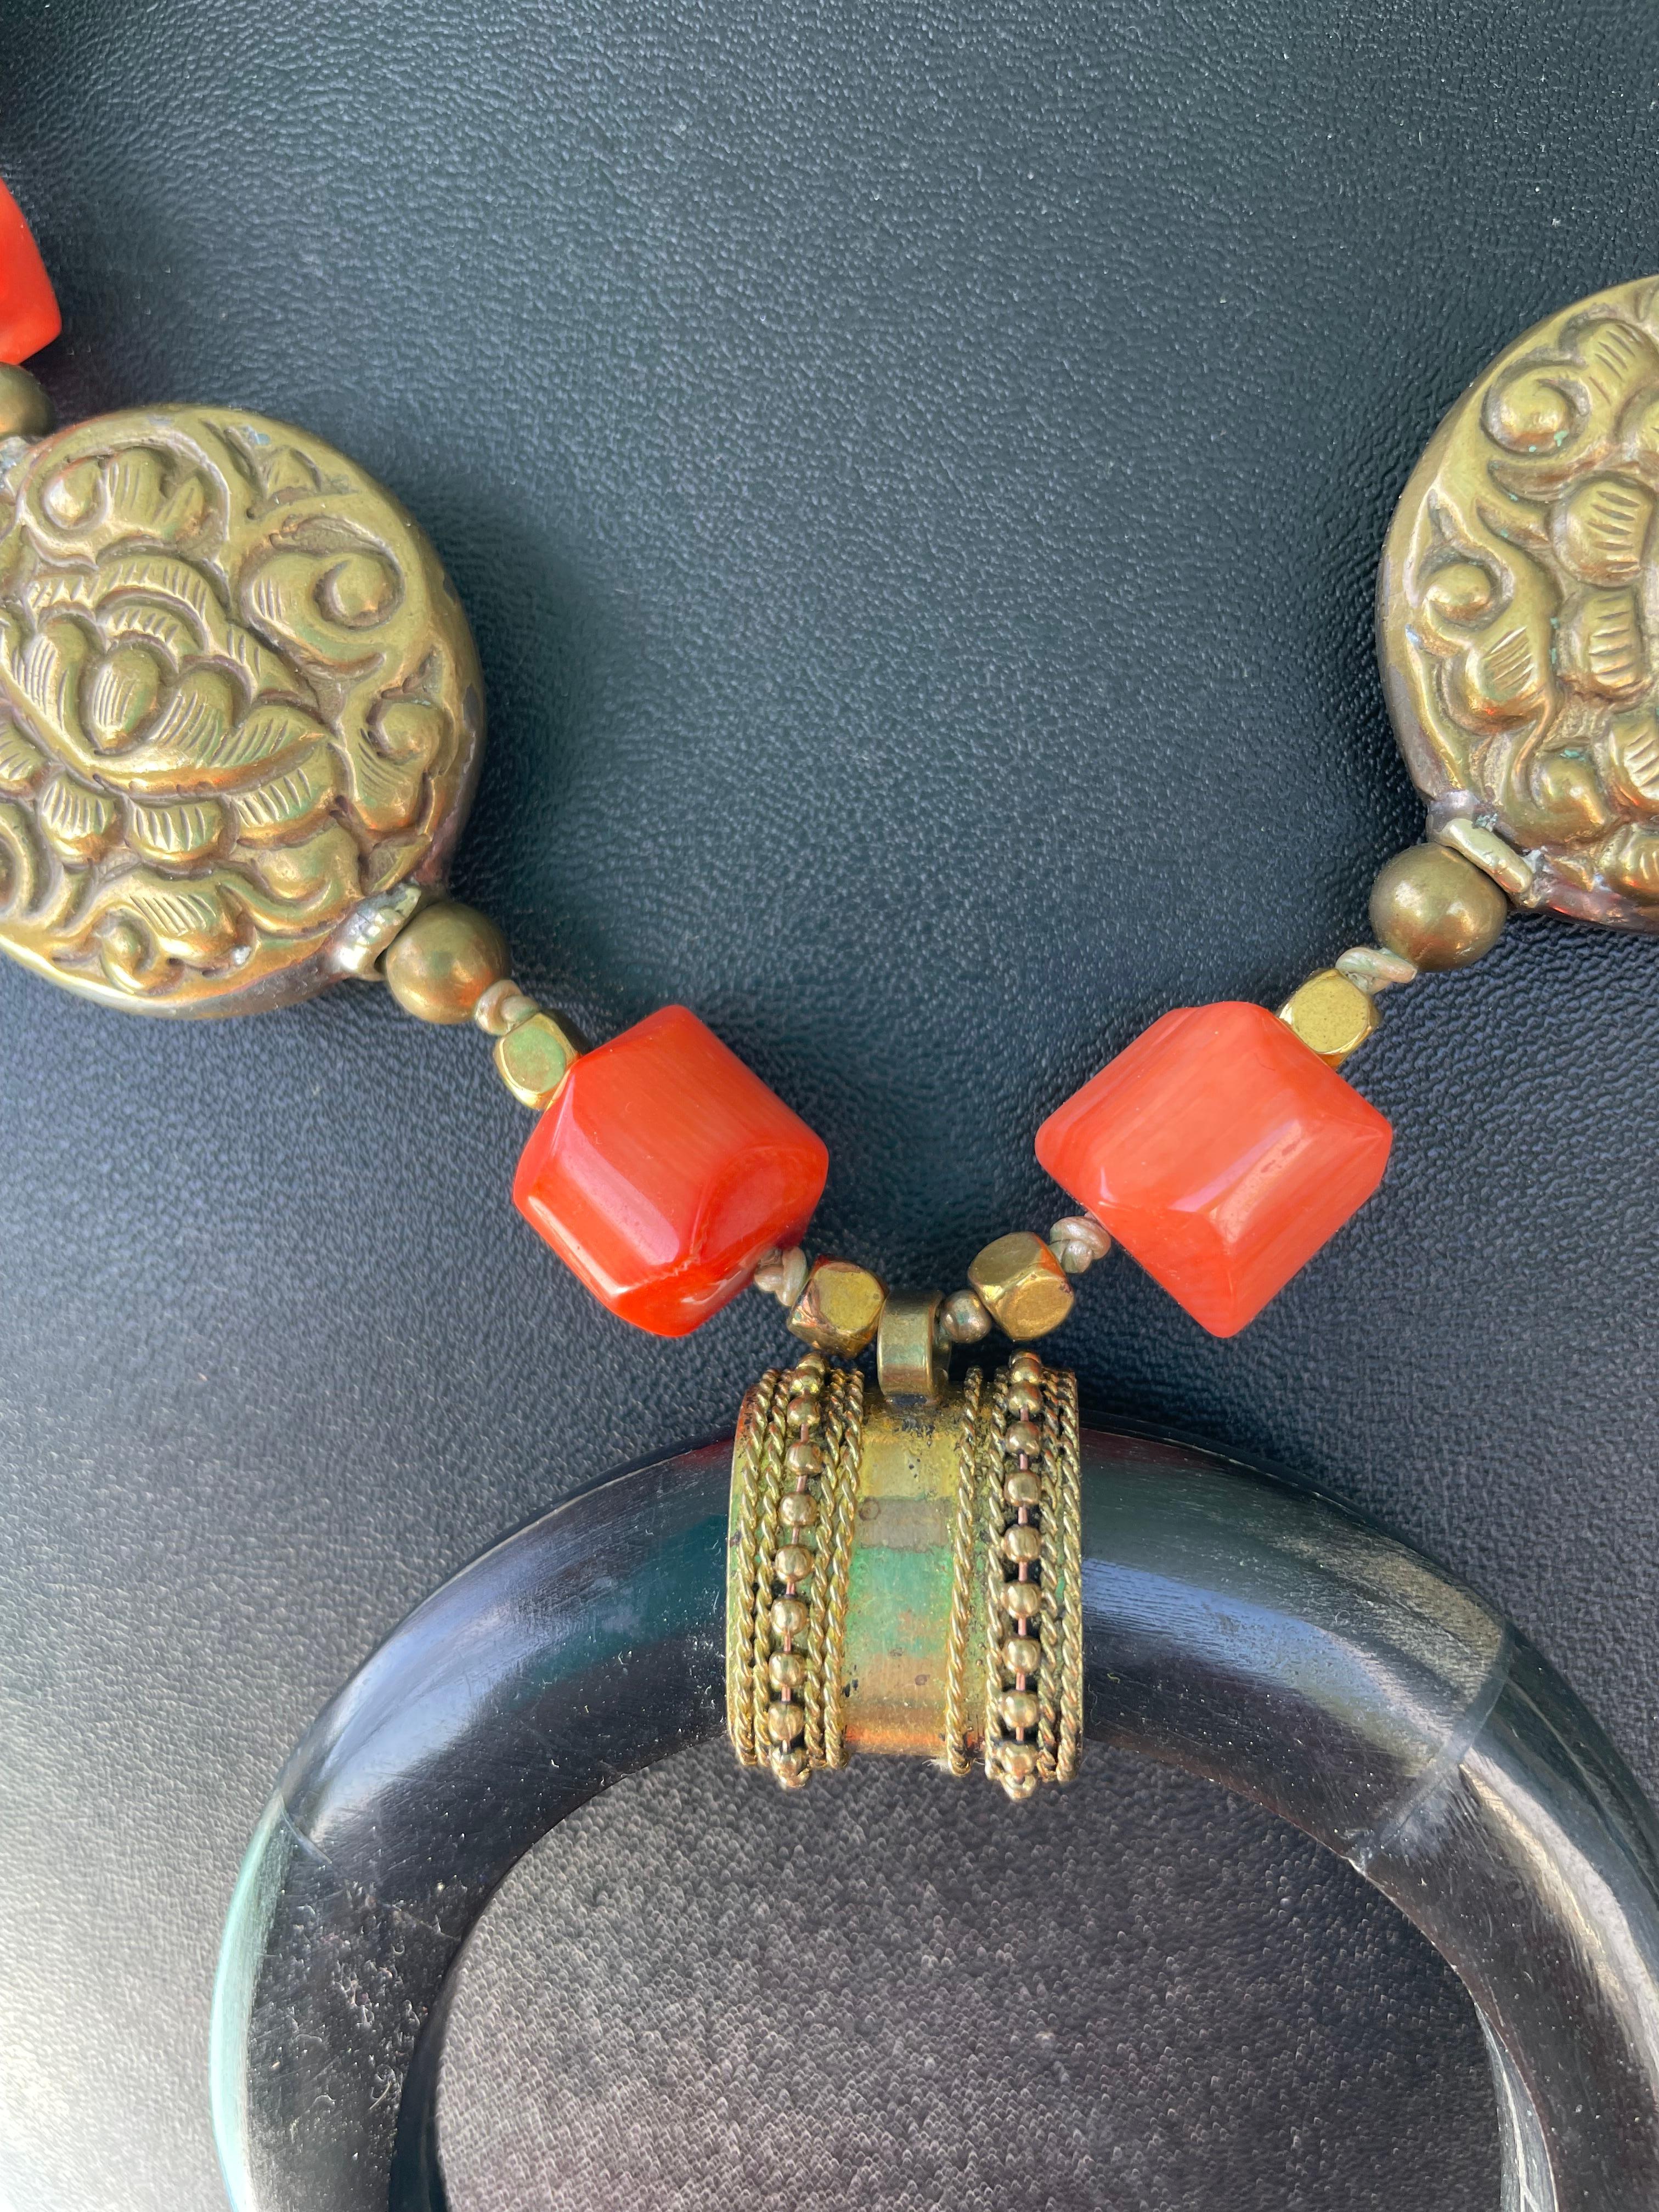 Lorraine’s Bijoux offers a handmade vintage Bone African Naja pendant with brass trim necklace.Large Tibetan Brass Repousse beads, faceted orange coral,
Tibetan Carnelian inlaid beads, and large curved Bone neckpieces, and wooden beads finish this